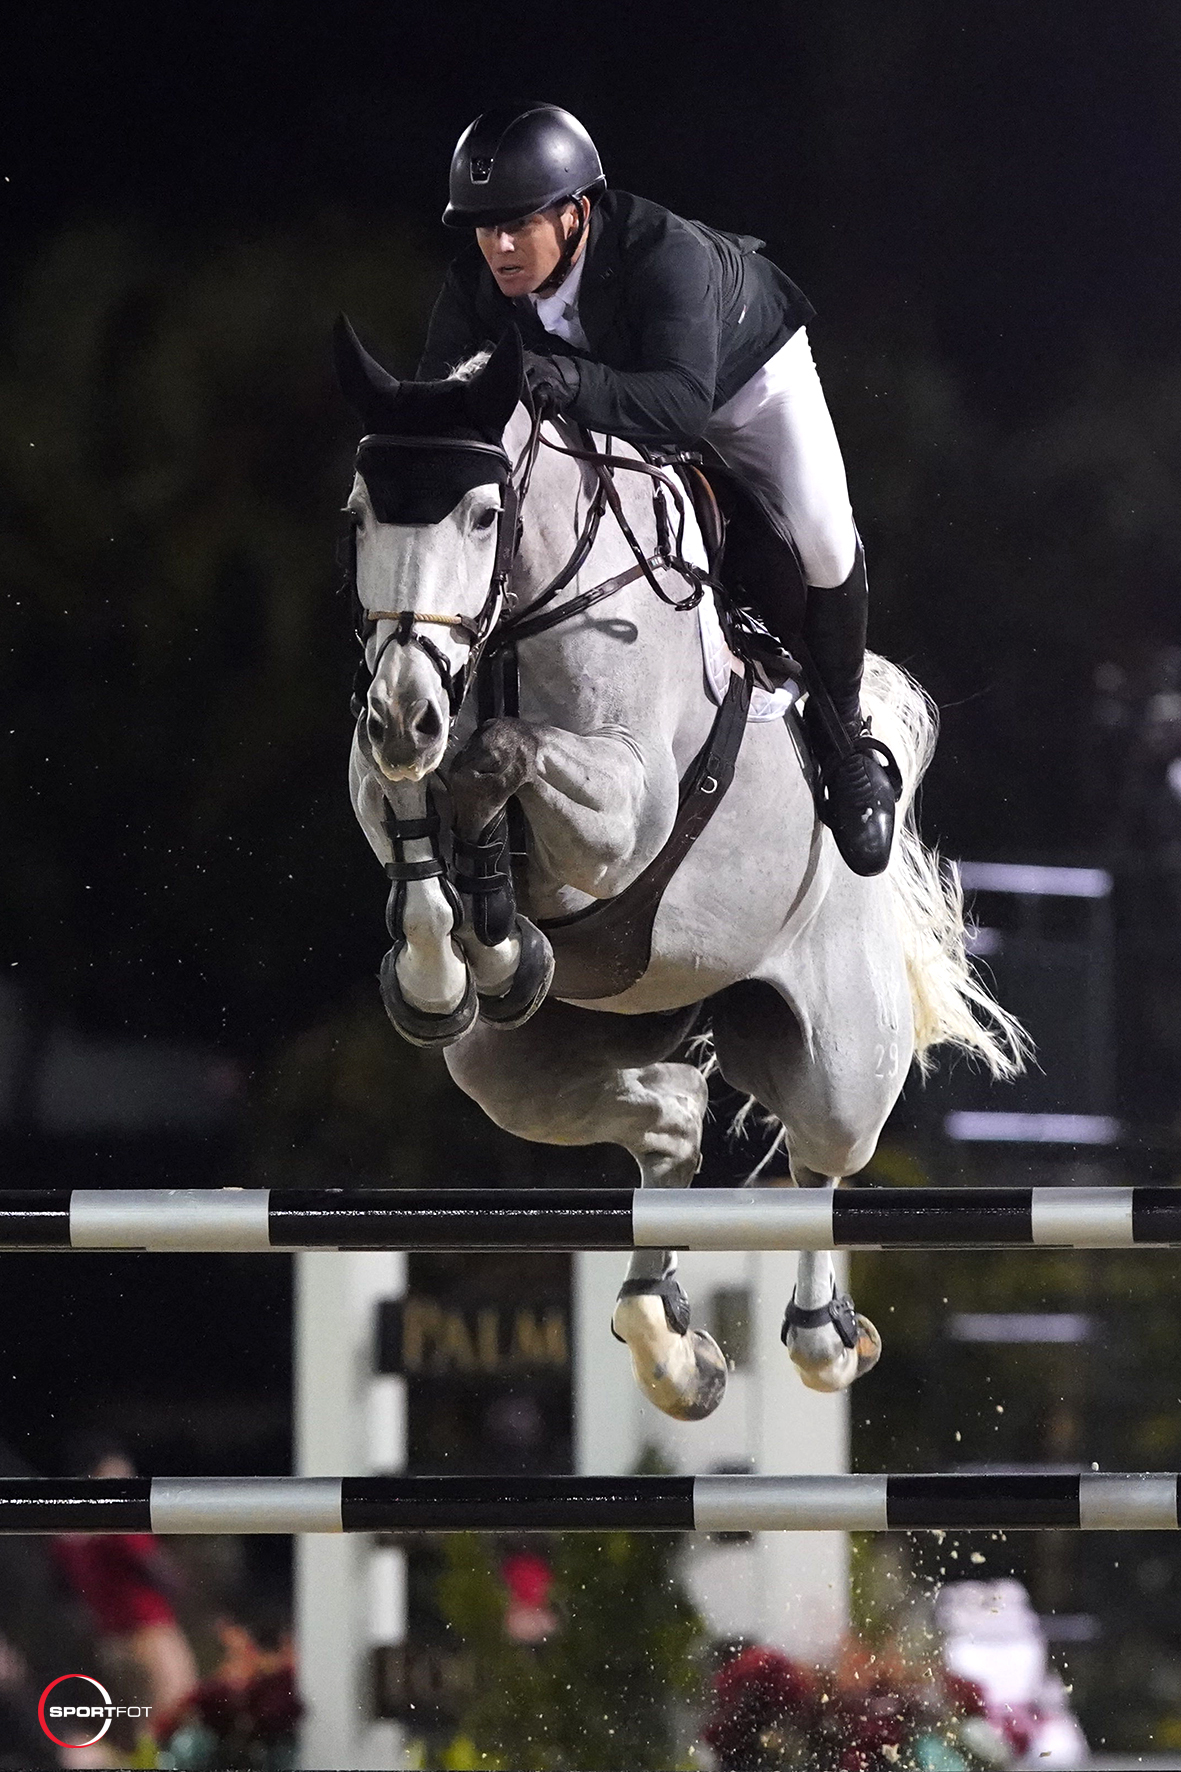 Sweetnam wins CSI5* Grand Prix of Wellington: "I made up for my mistake in the CSI3* today"